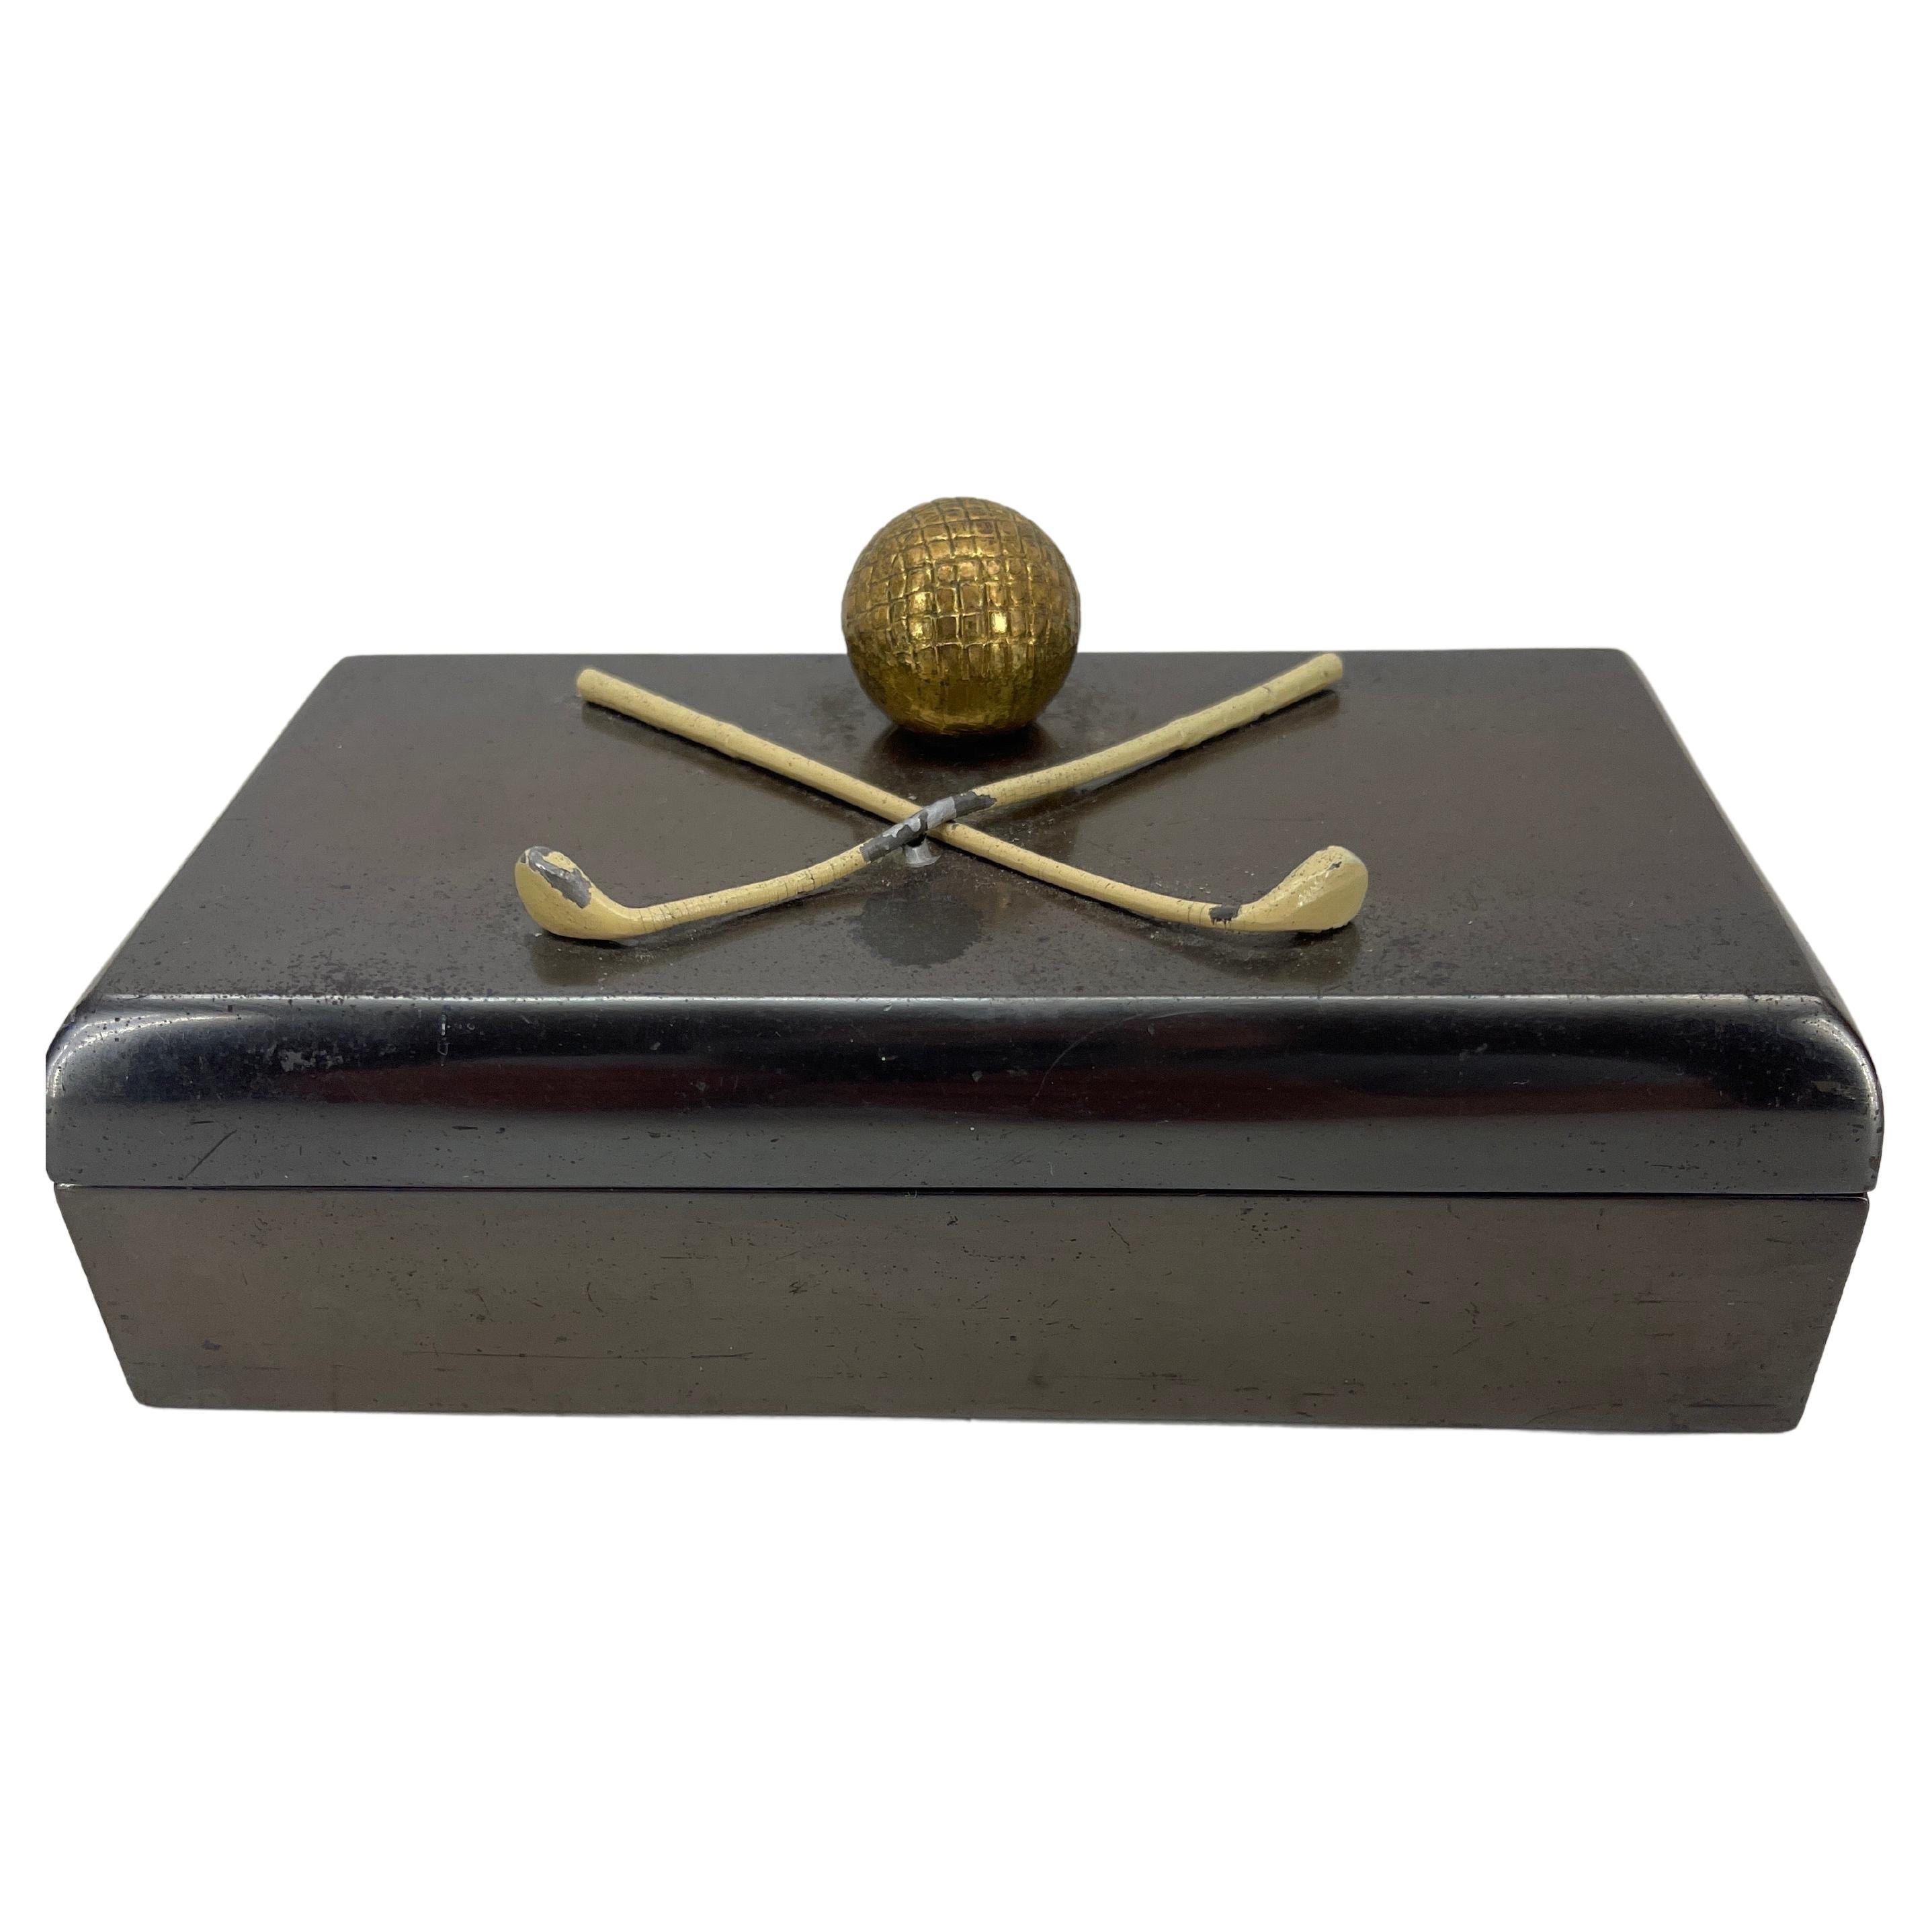 Art Deco cigarette or jewelry box in thick heavy patinated bronze with white painted golf clubs and gilded golf ball as lid decoration. The interior of the box has two compartments made from later installed faux marble linings. These are loose